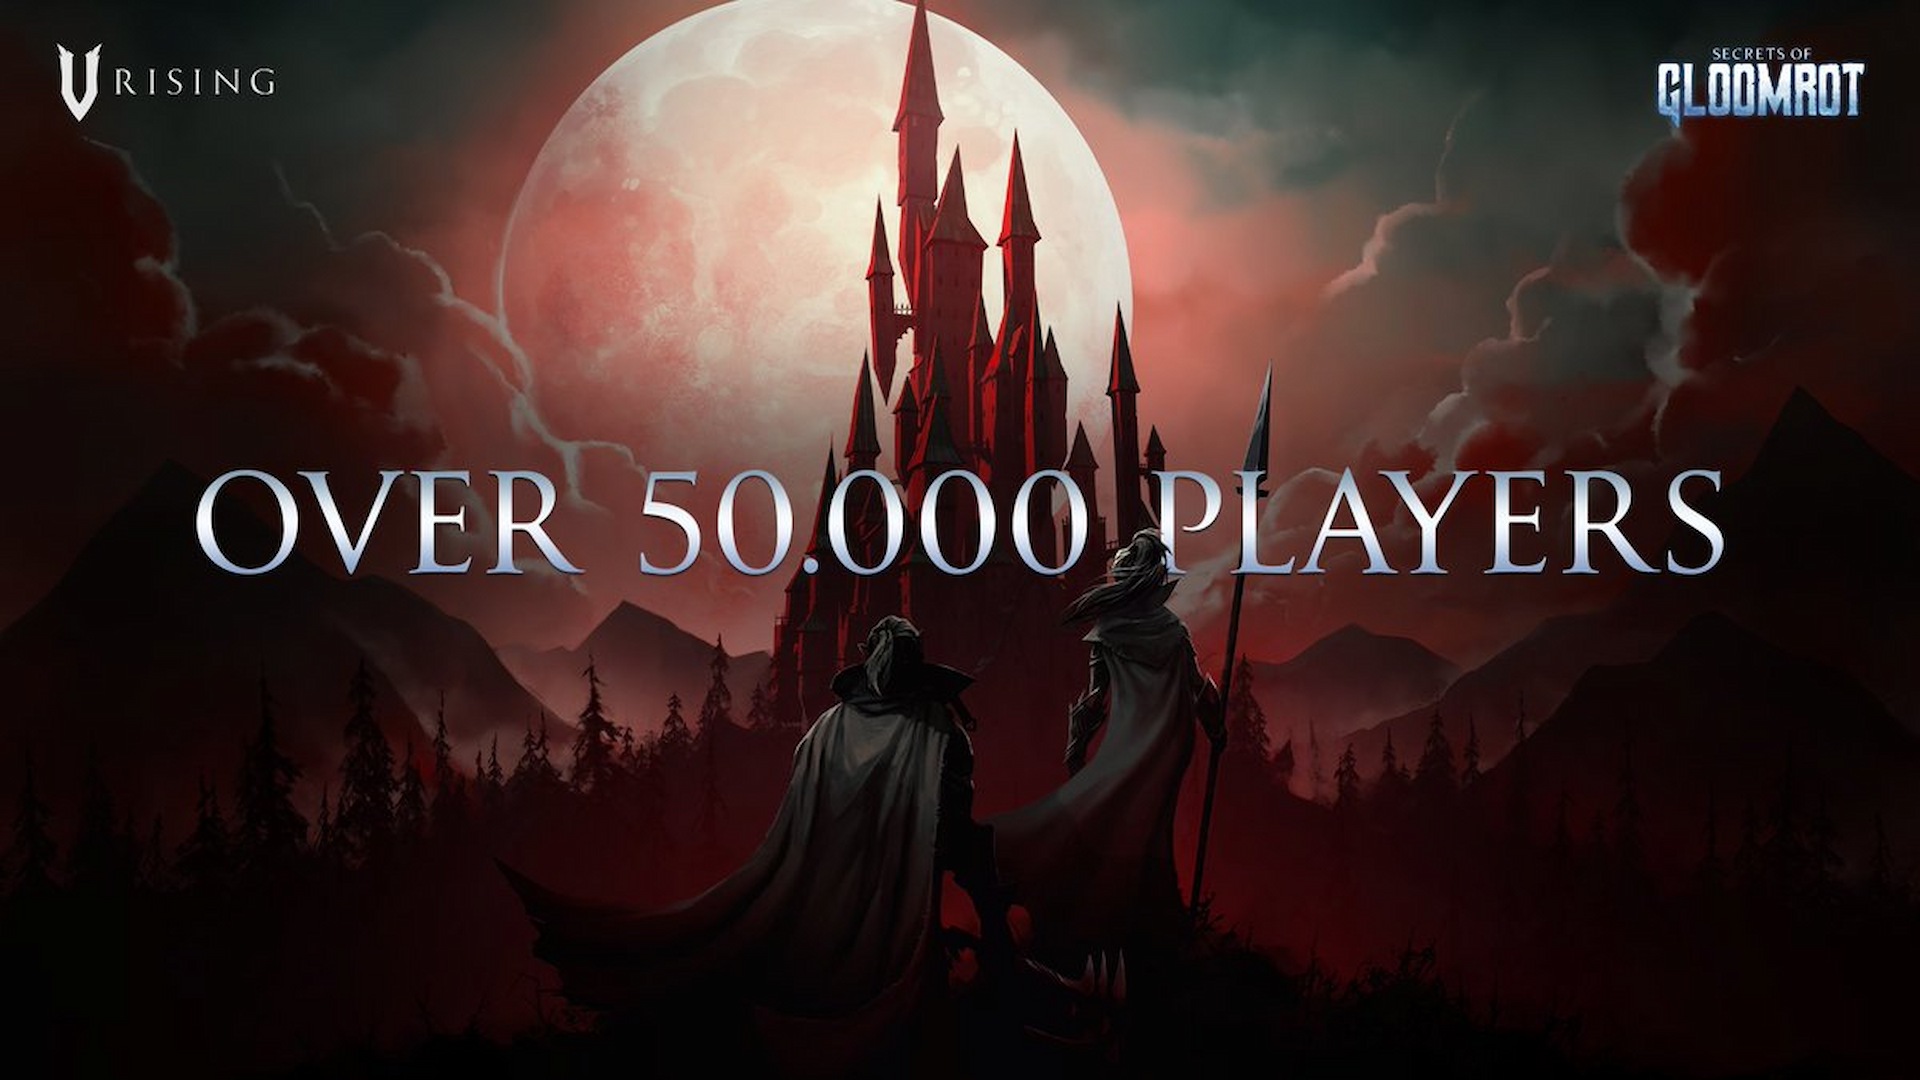 Over 50,000 players are on V Rising now